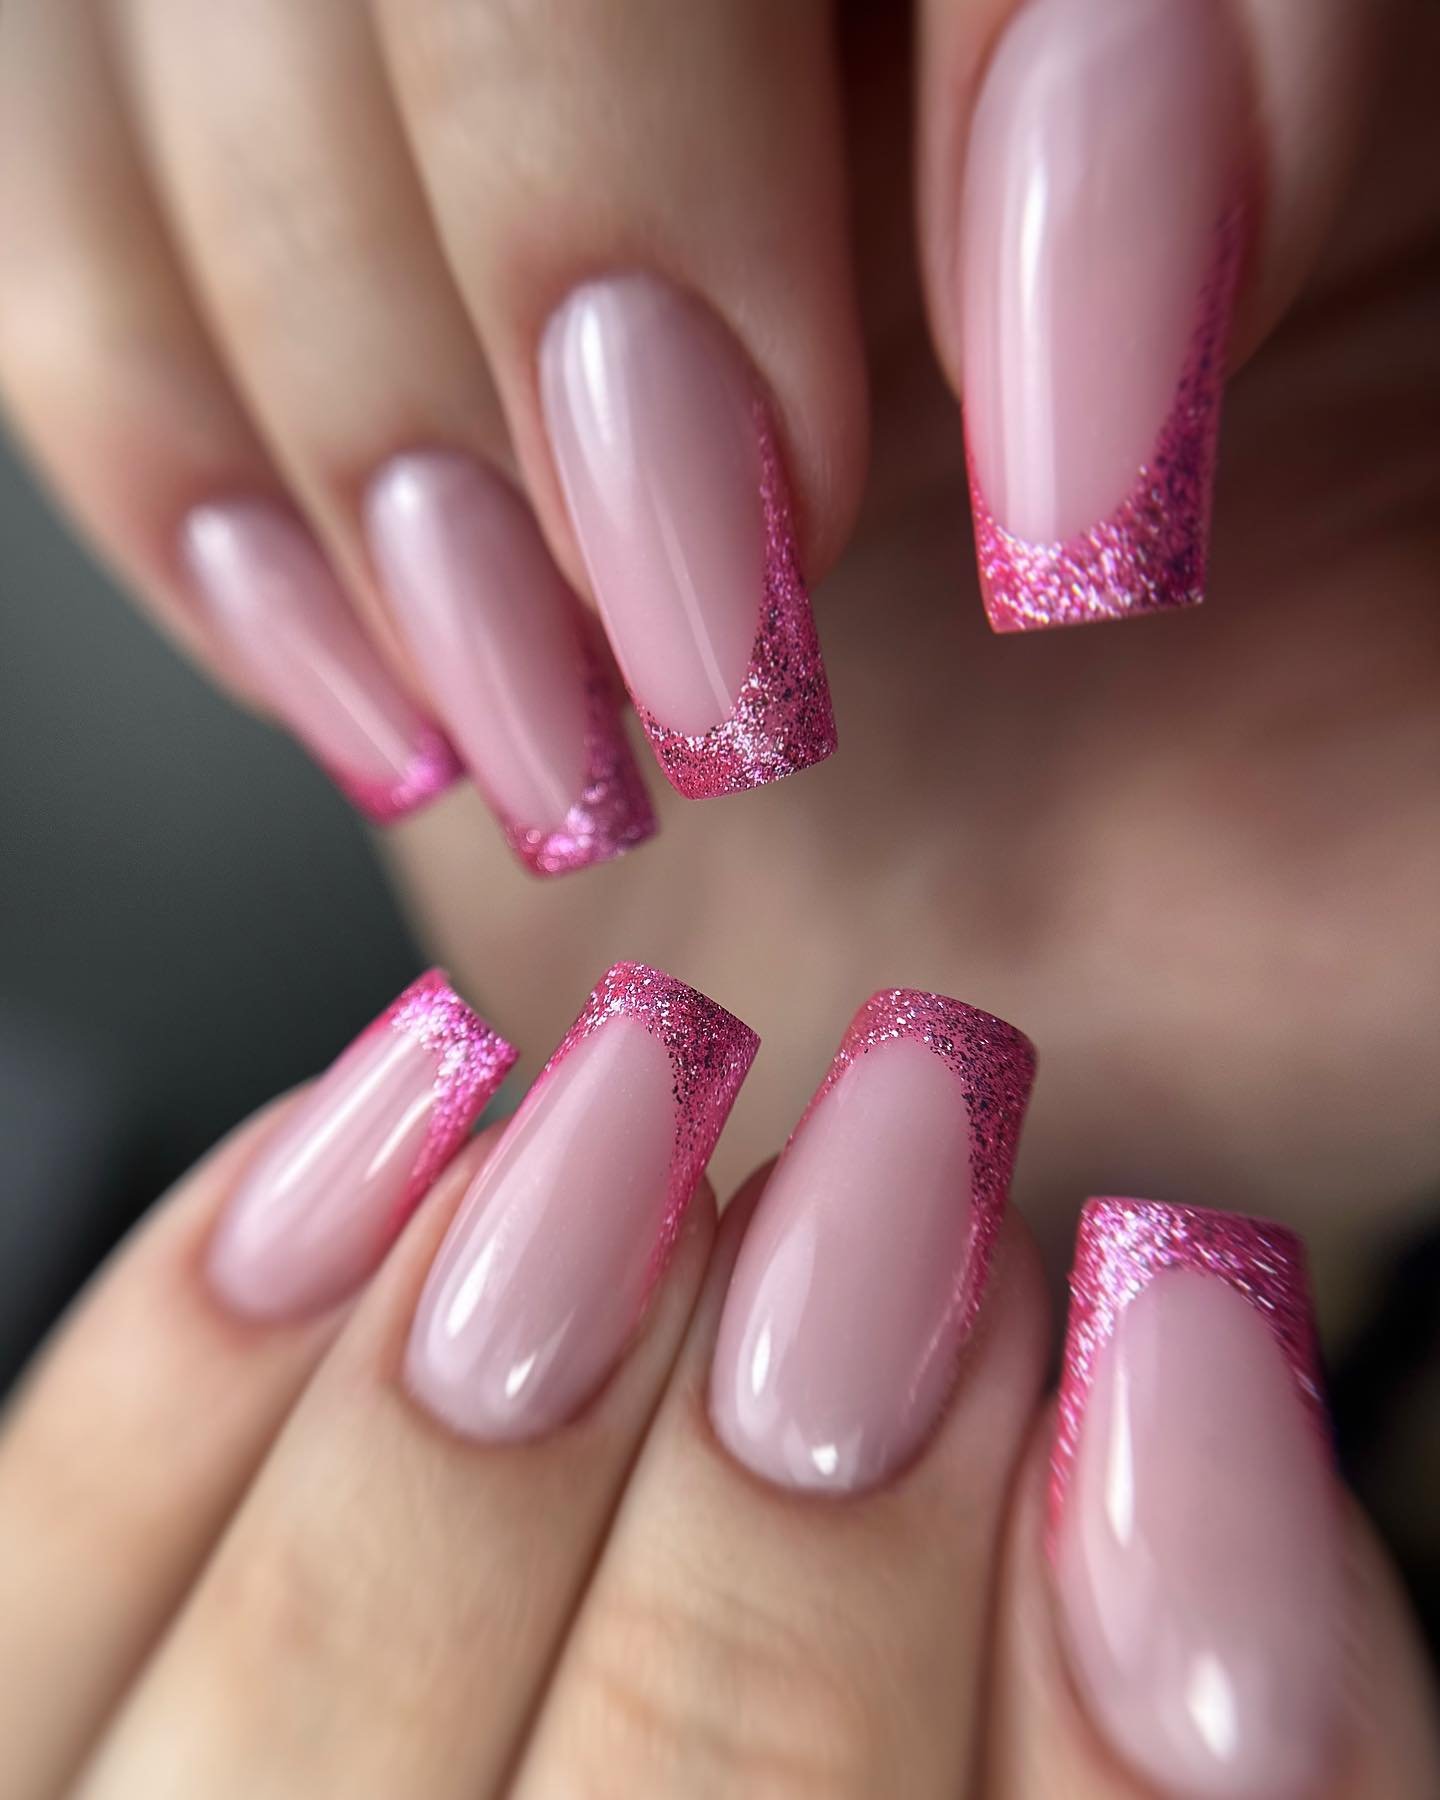 22 - Picture of French Tip Nails